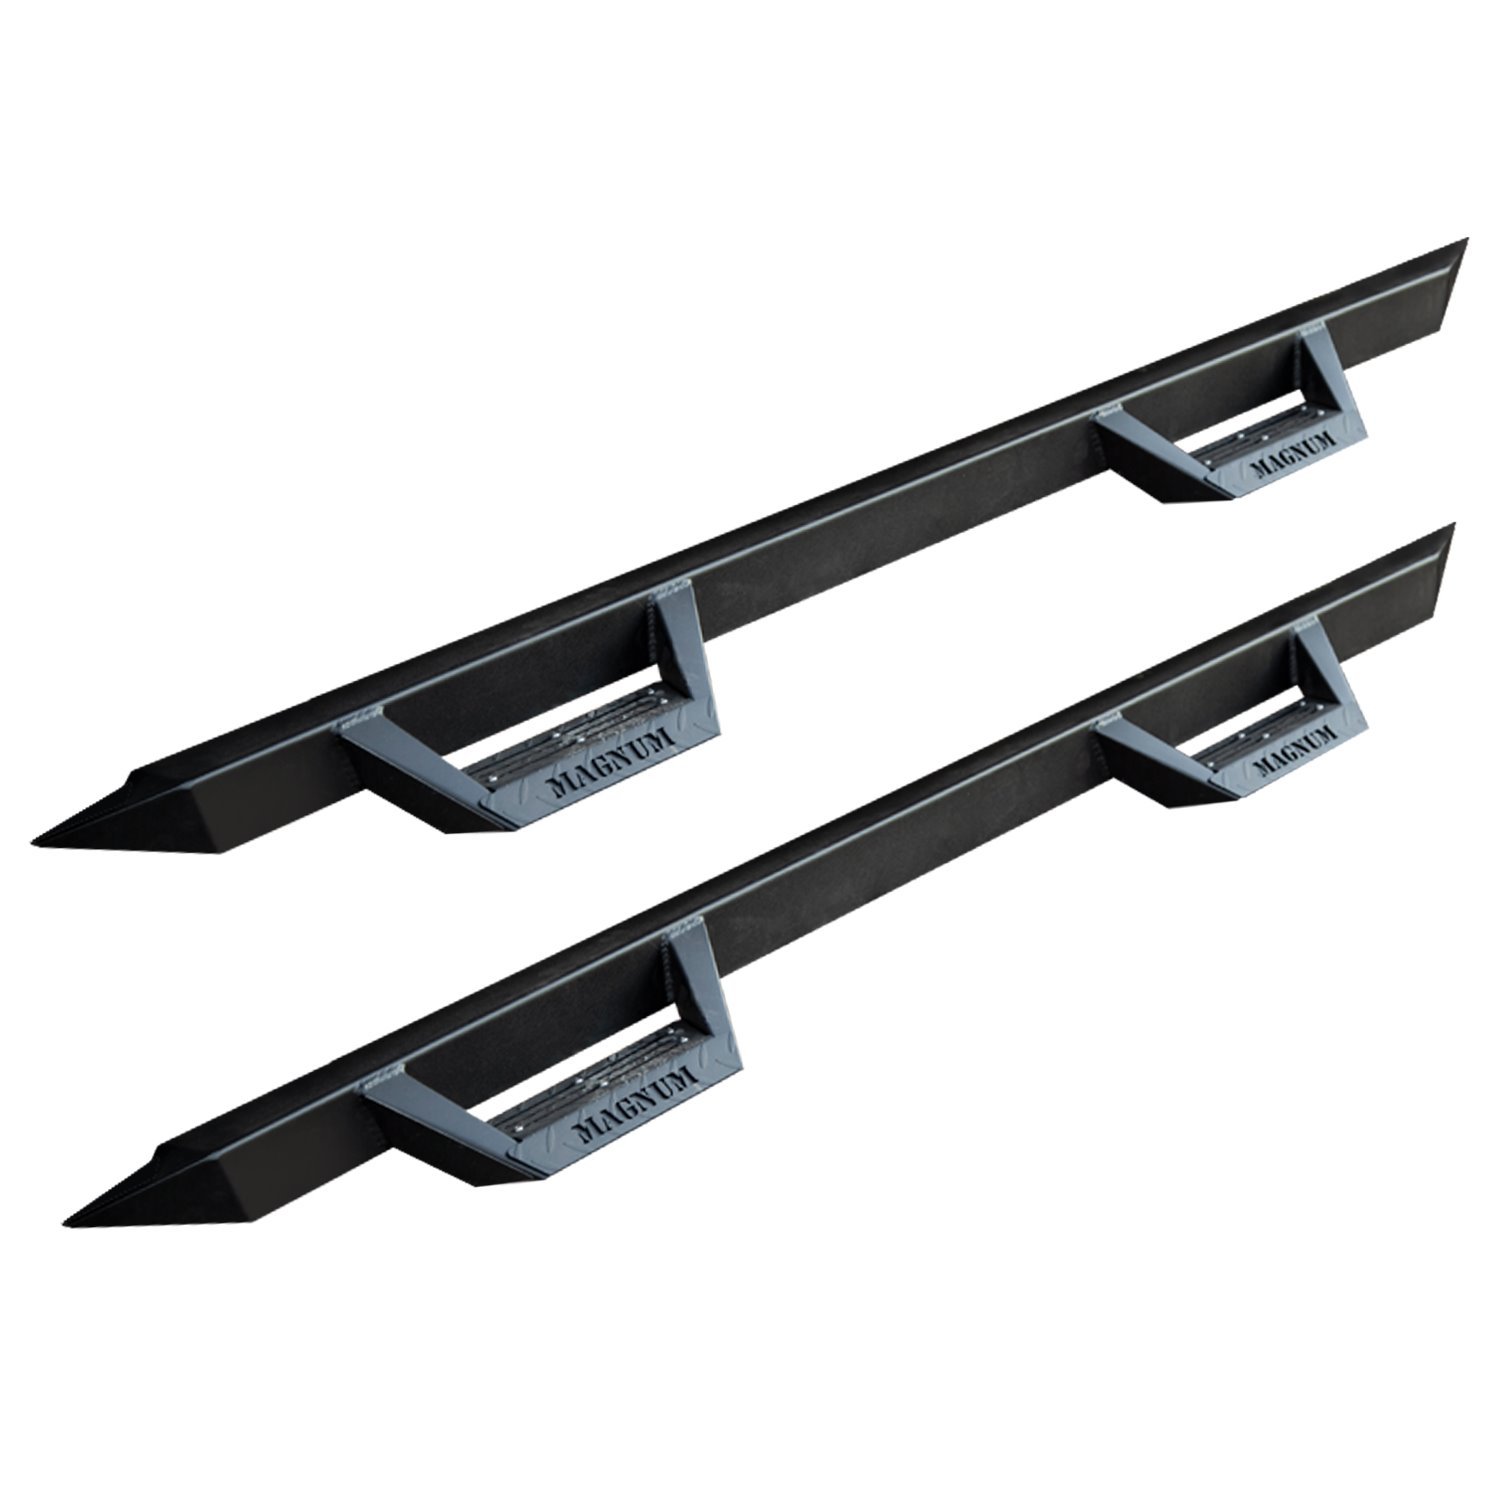 RTS10FD Magnum RT Drop Steps, Black Textured Alloy Steel, Fits Select Ford Ranger Crew Cab